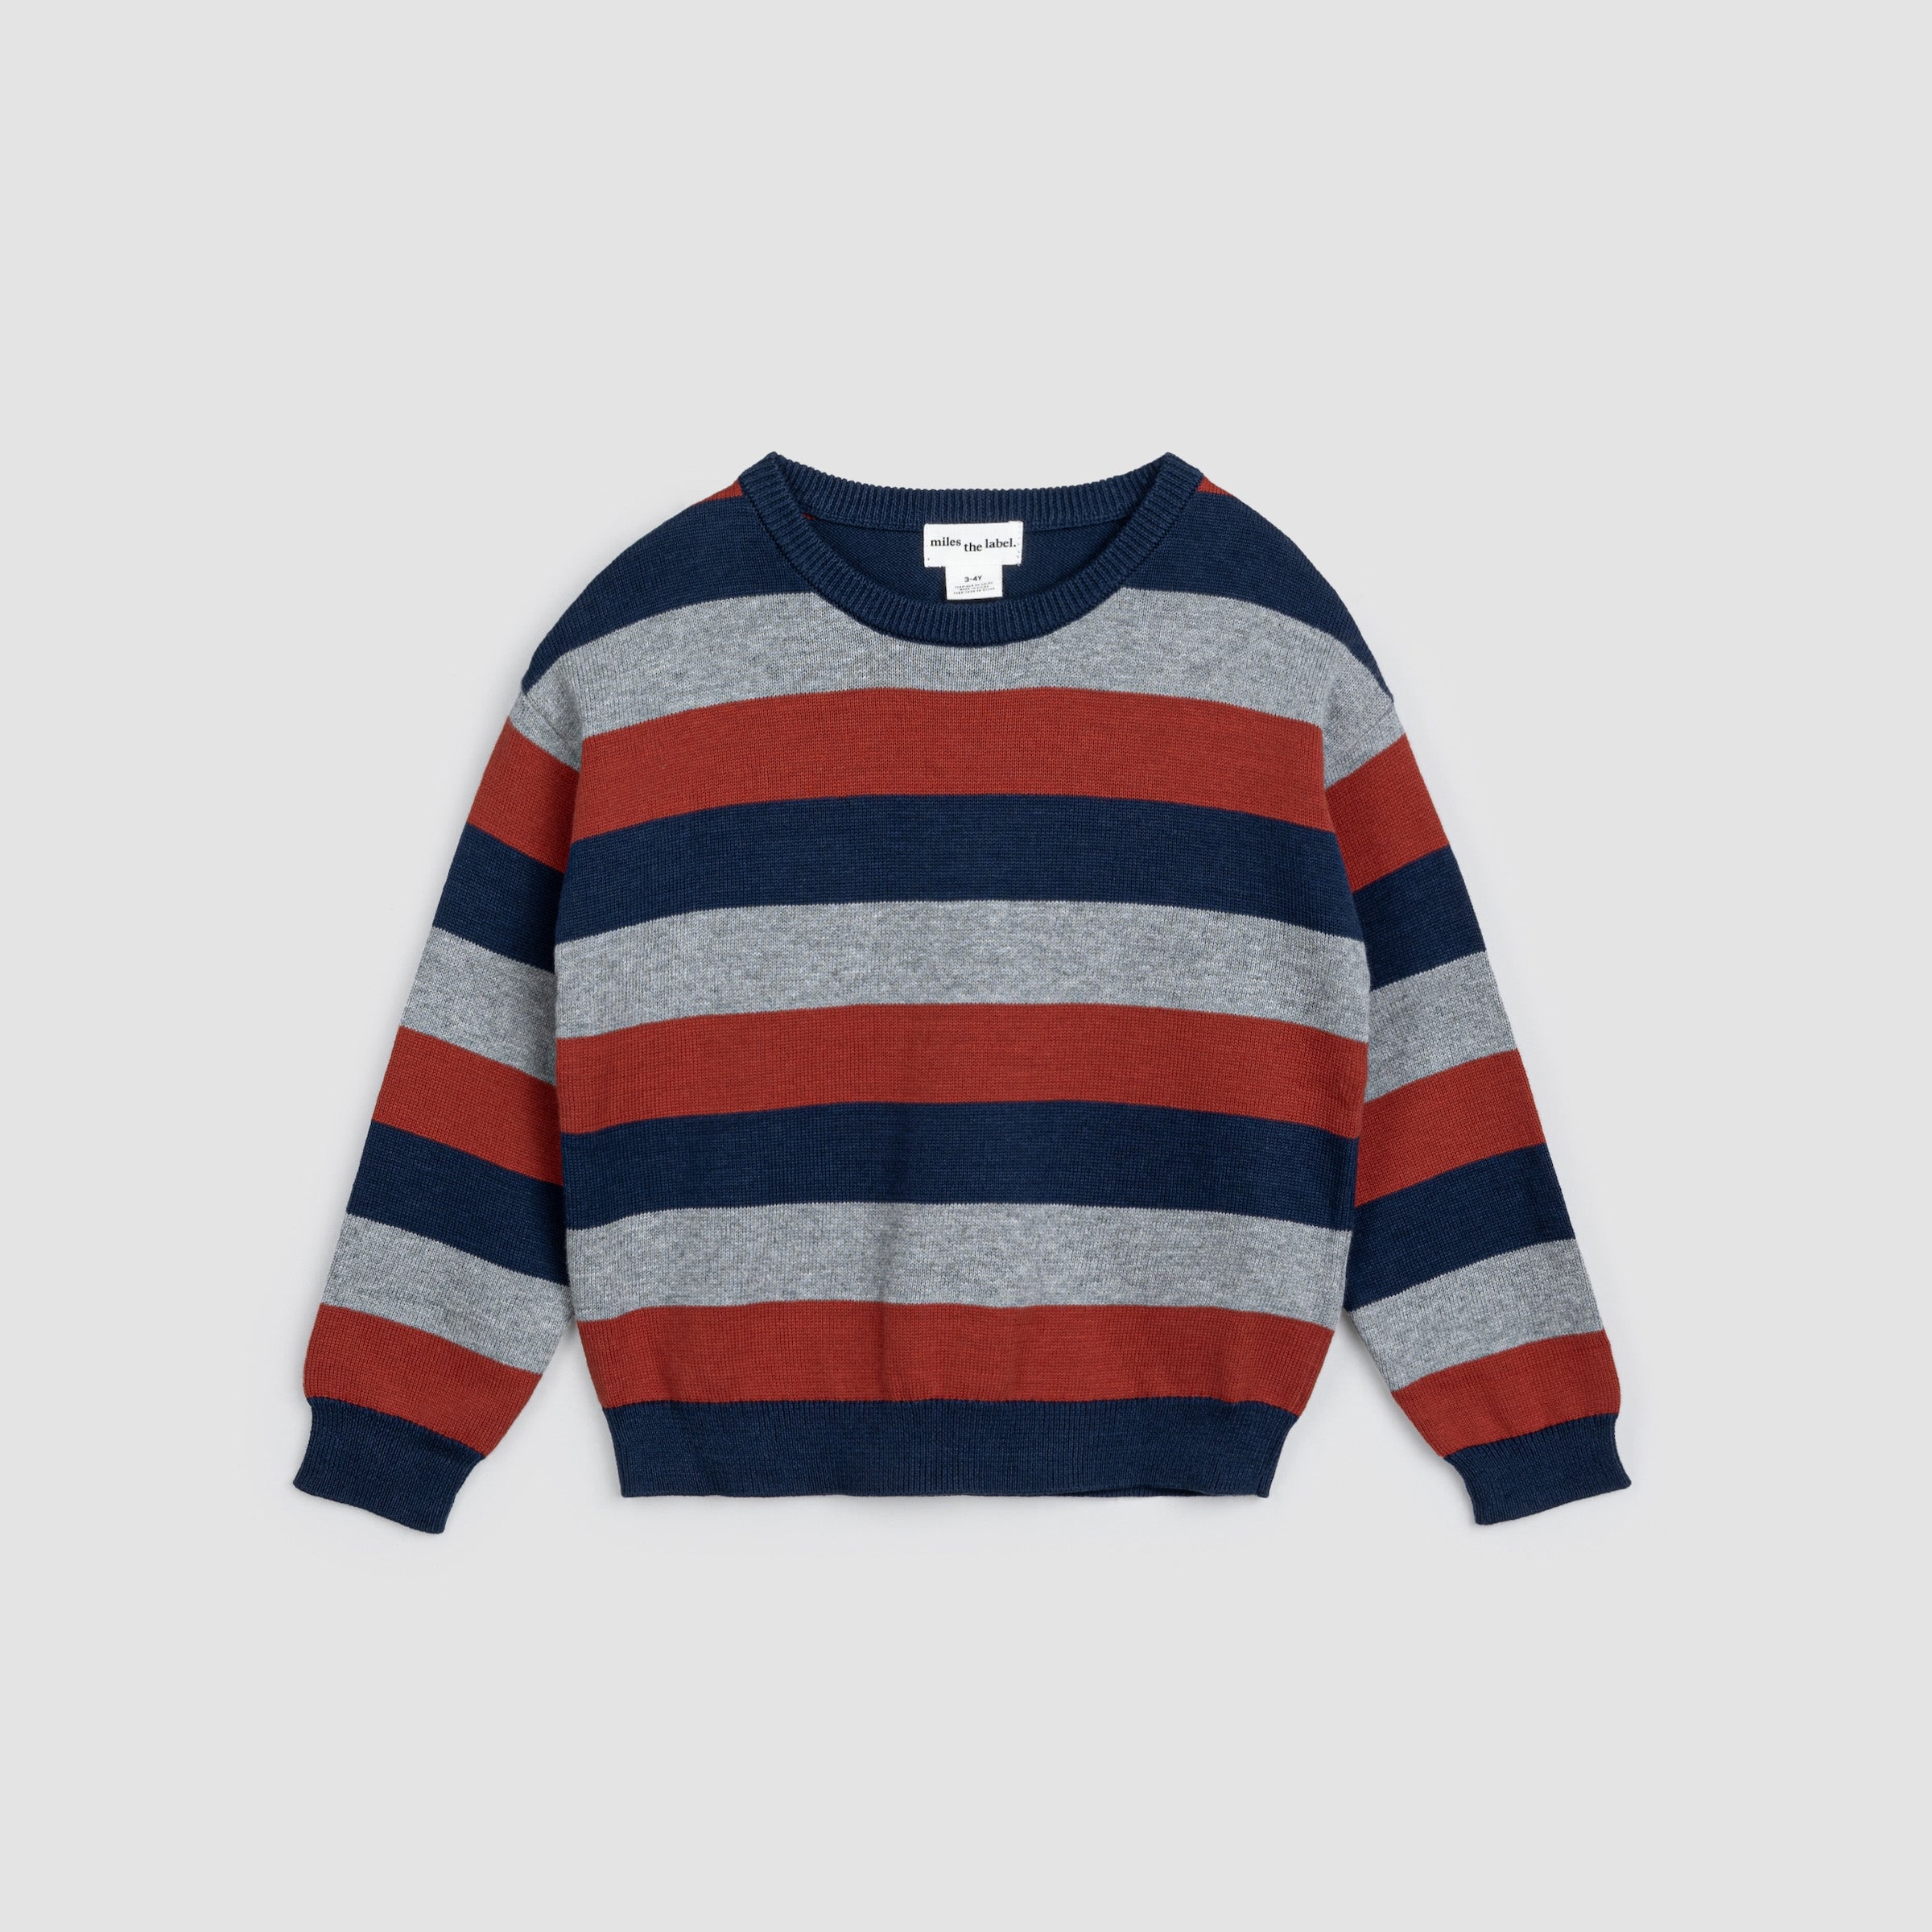 Brick, Navy and Heather Grey Striped Sweater – miles the label